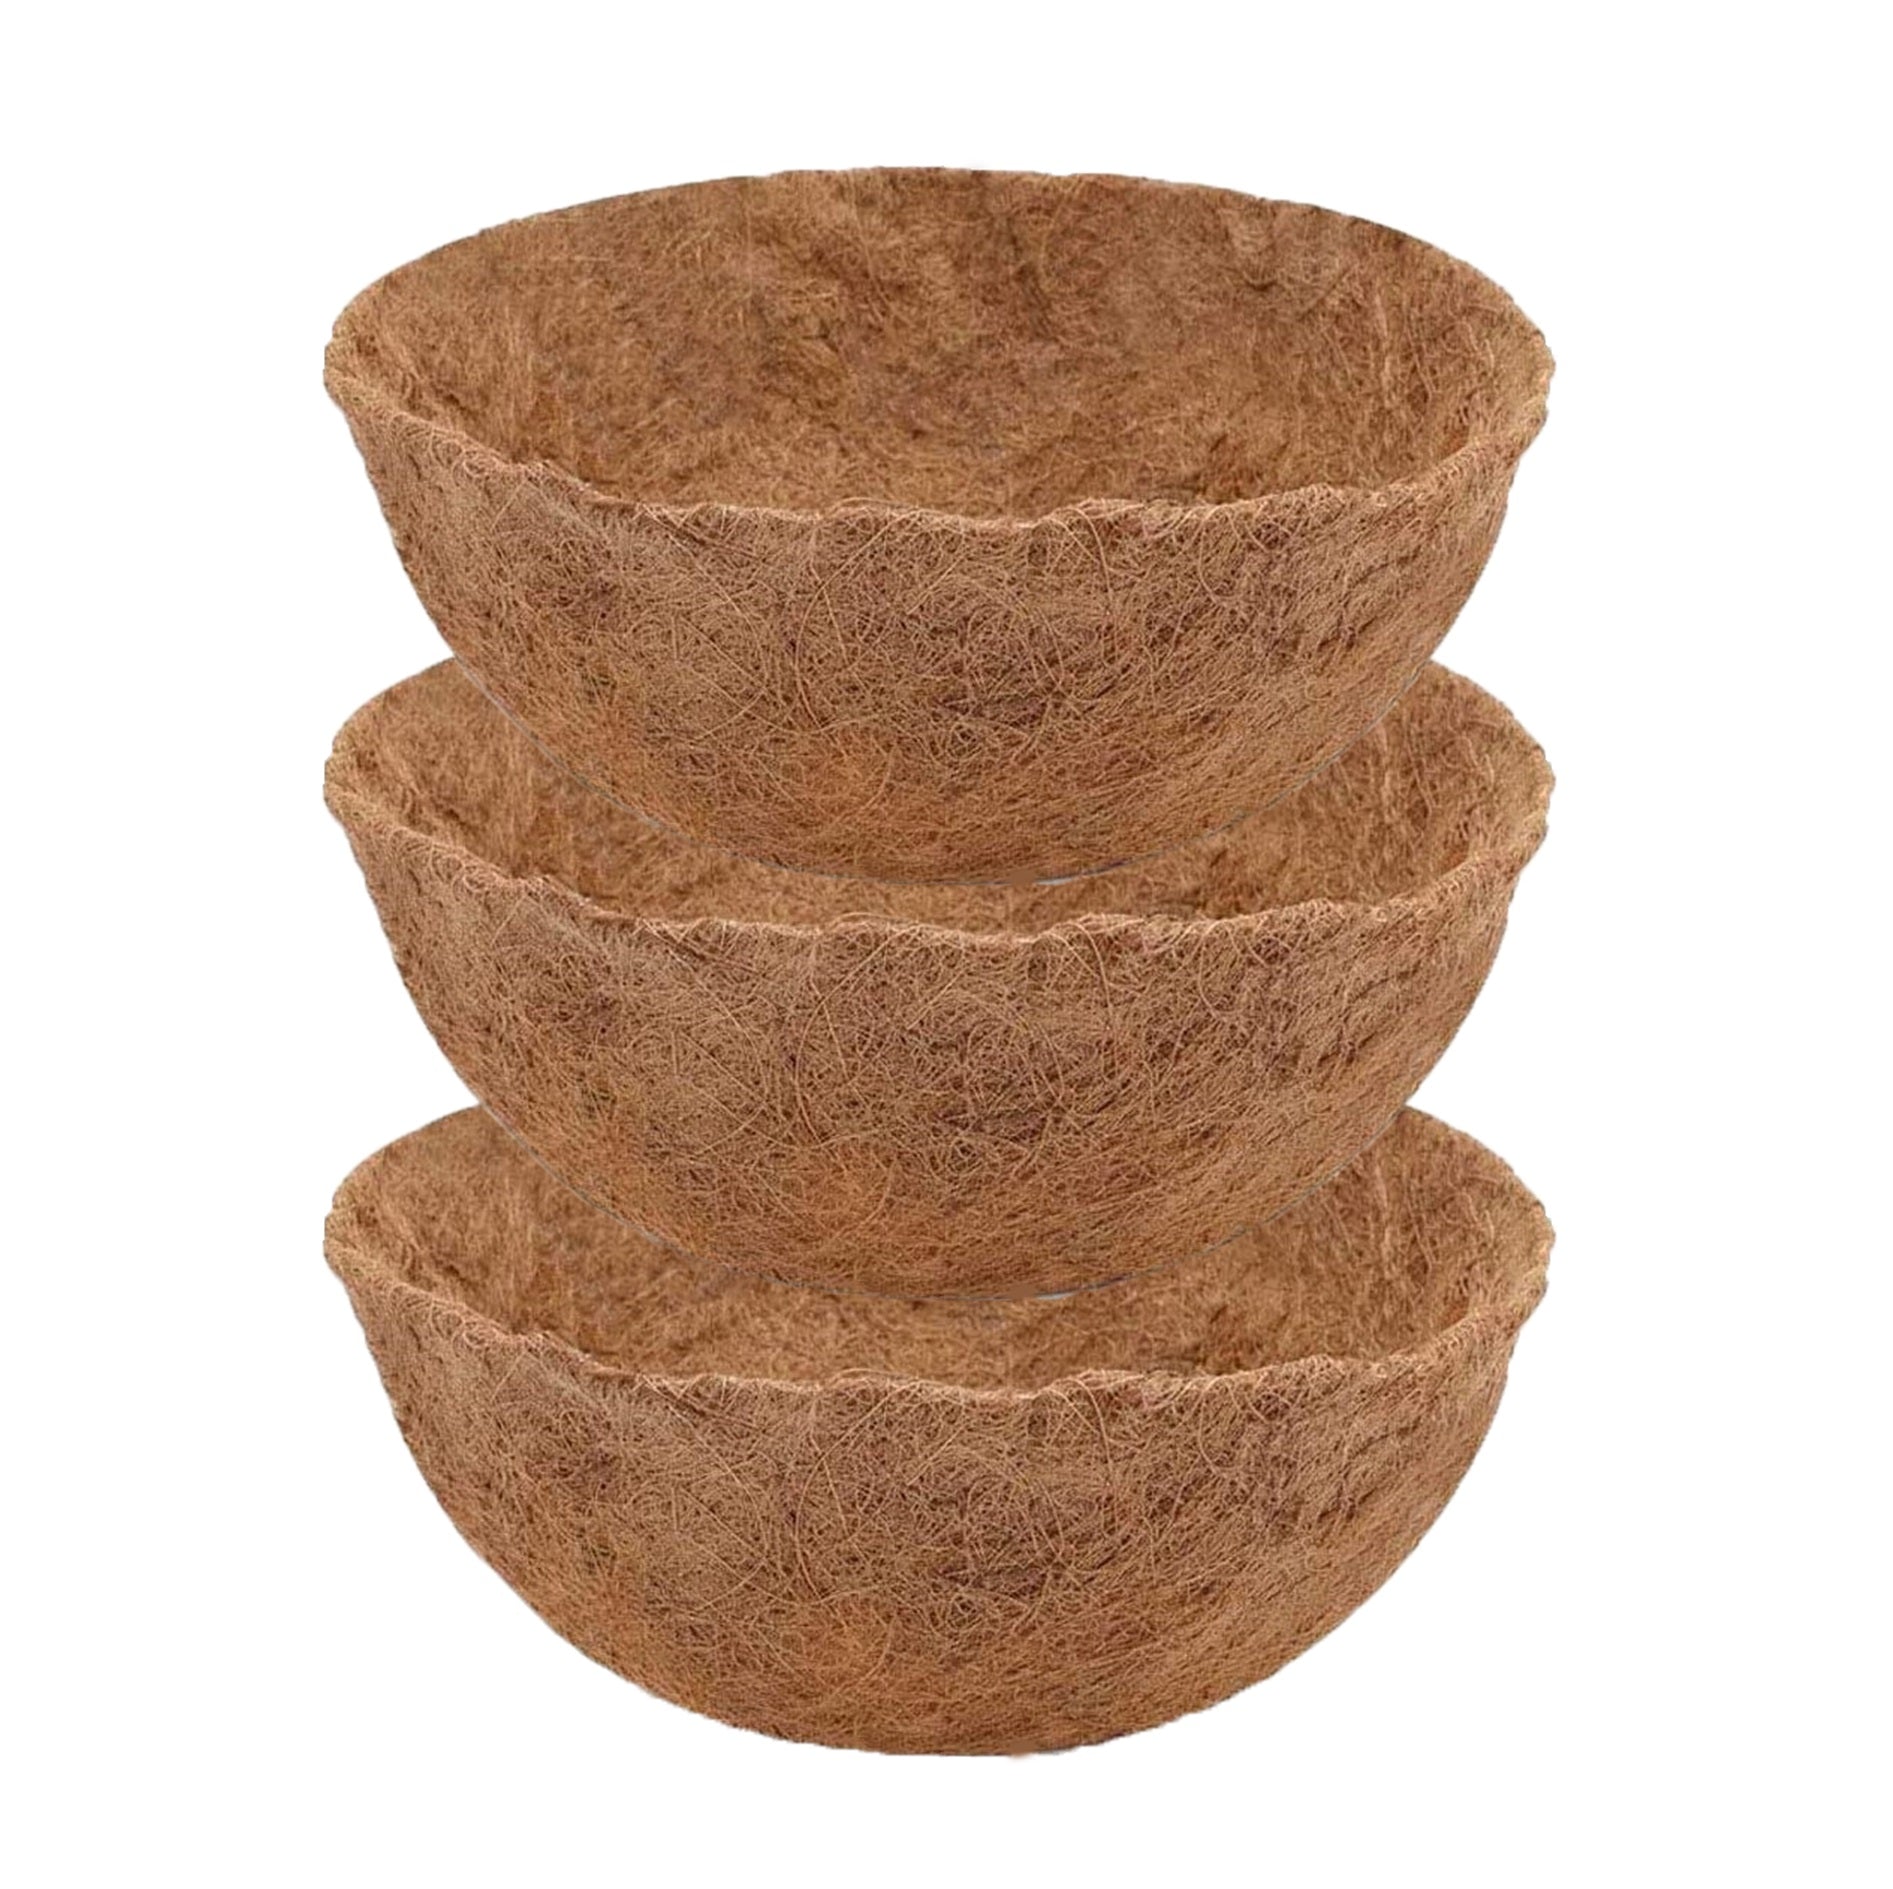 Coco Coir Liner for Hanging Planter Baskets - Pack of 3 Refill / Replacement Liners